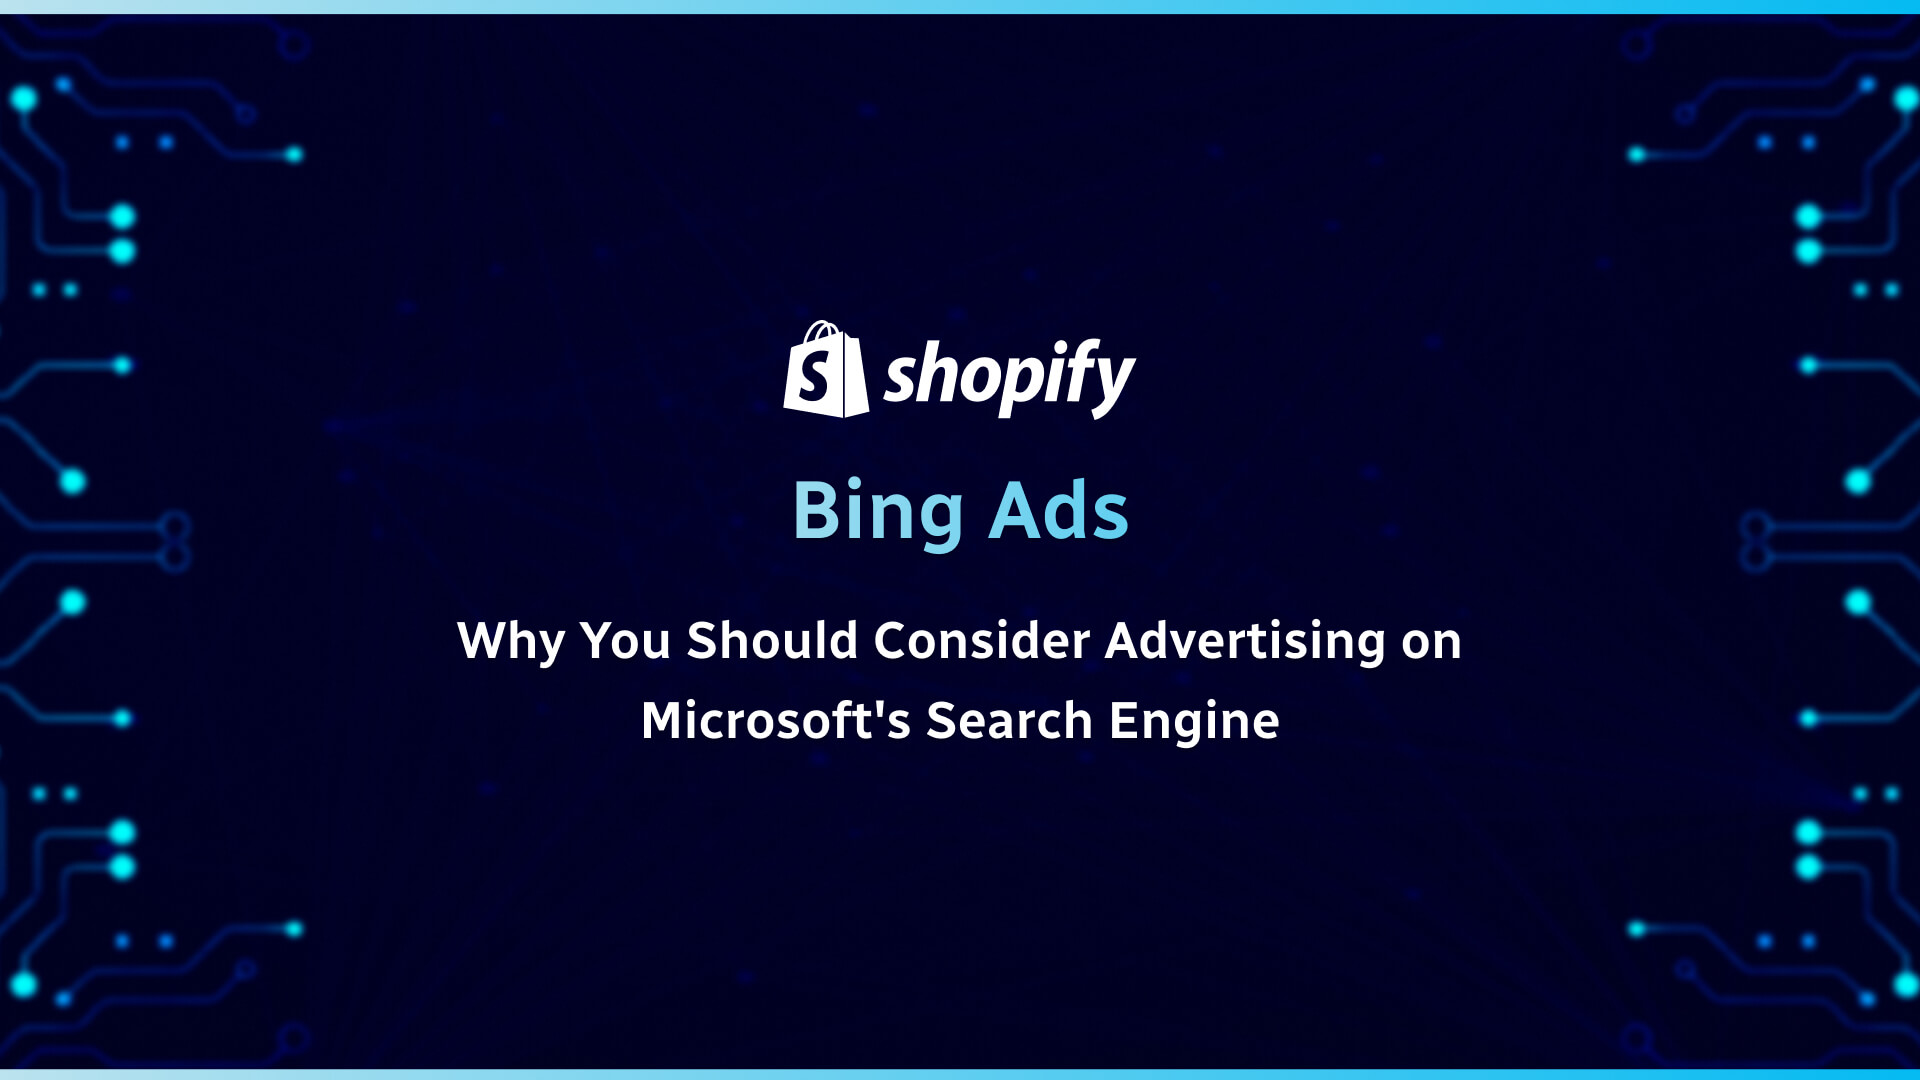 Bing Ads: Why You Should Consider Advertising on Microsoft’s Search Engine